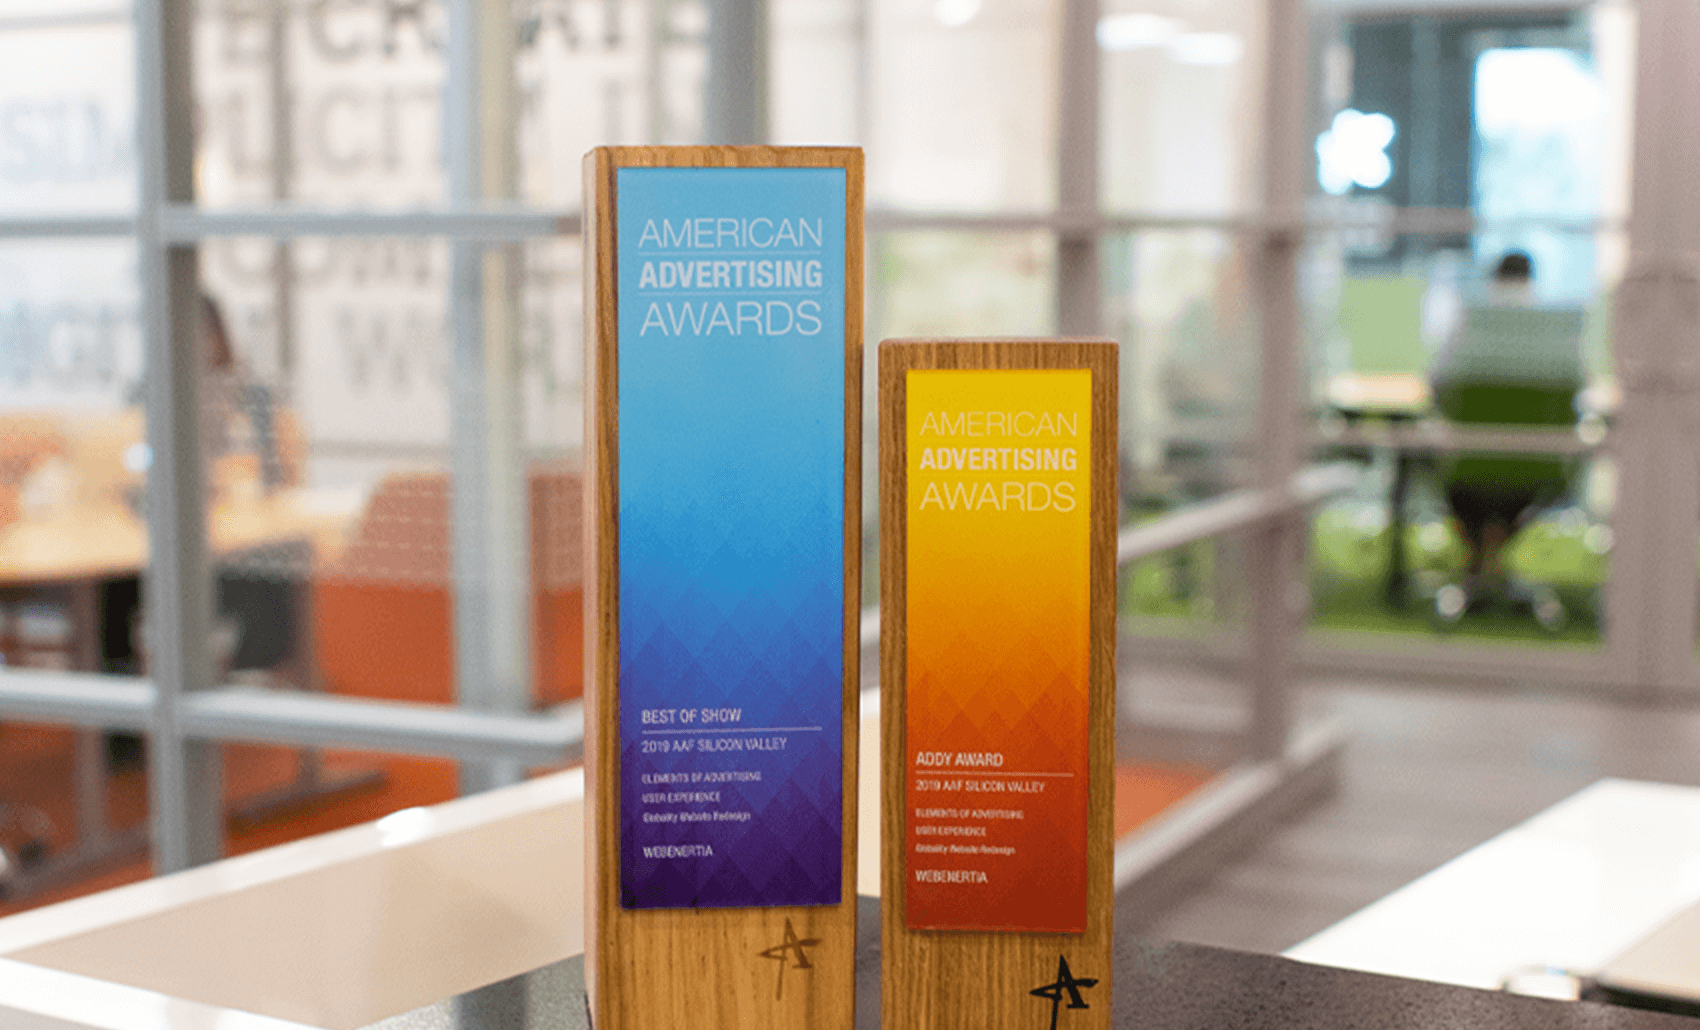 2019 Addy Awards - Best of Show Statue and Addy Award Statue